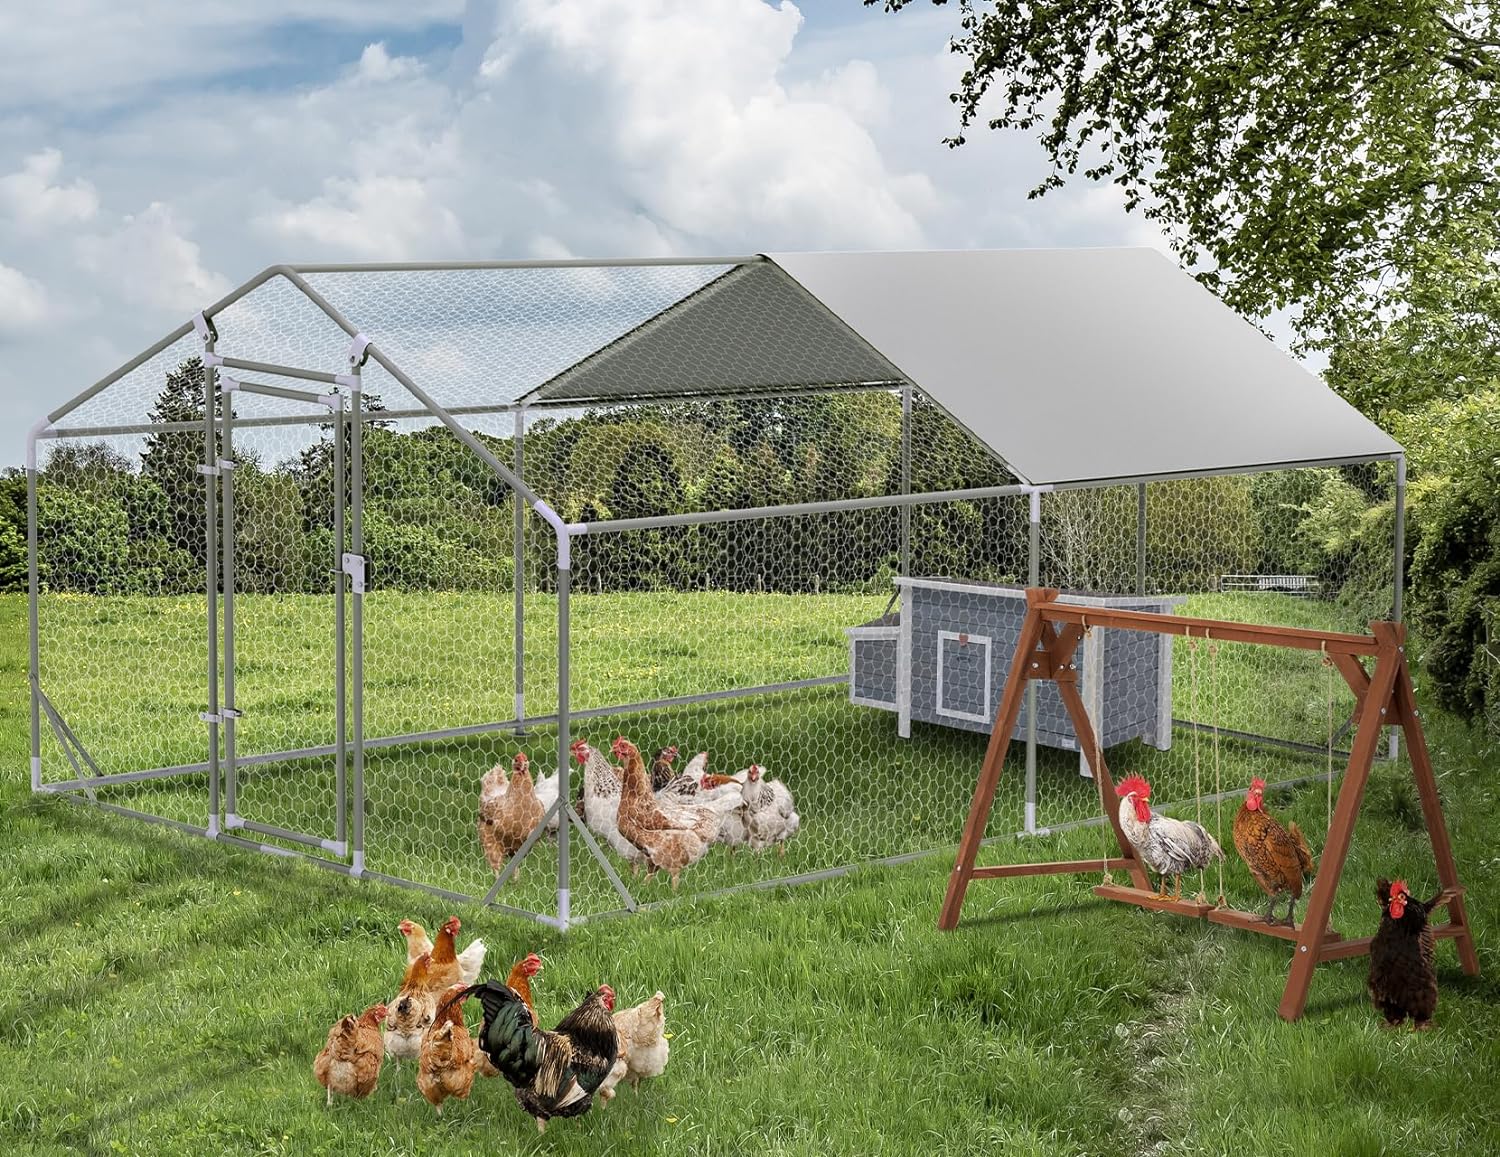 PETSFIT Metal Chicken Coop with Anti-Rust Durable Steel & 420D Anti-Ultraviolet Waterproof Cover, Large Walk-in Poultry Cage Chicken Run Duck House for Outdoor Farm Use(118"x158"x76.8"-动物/宠物用品